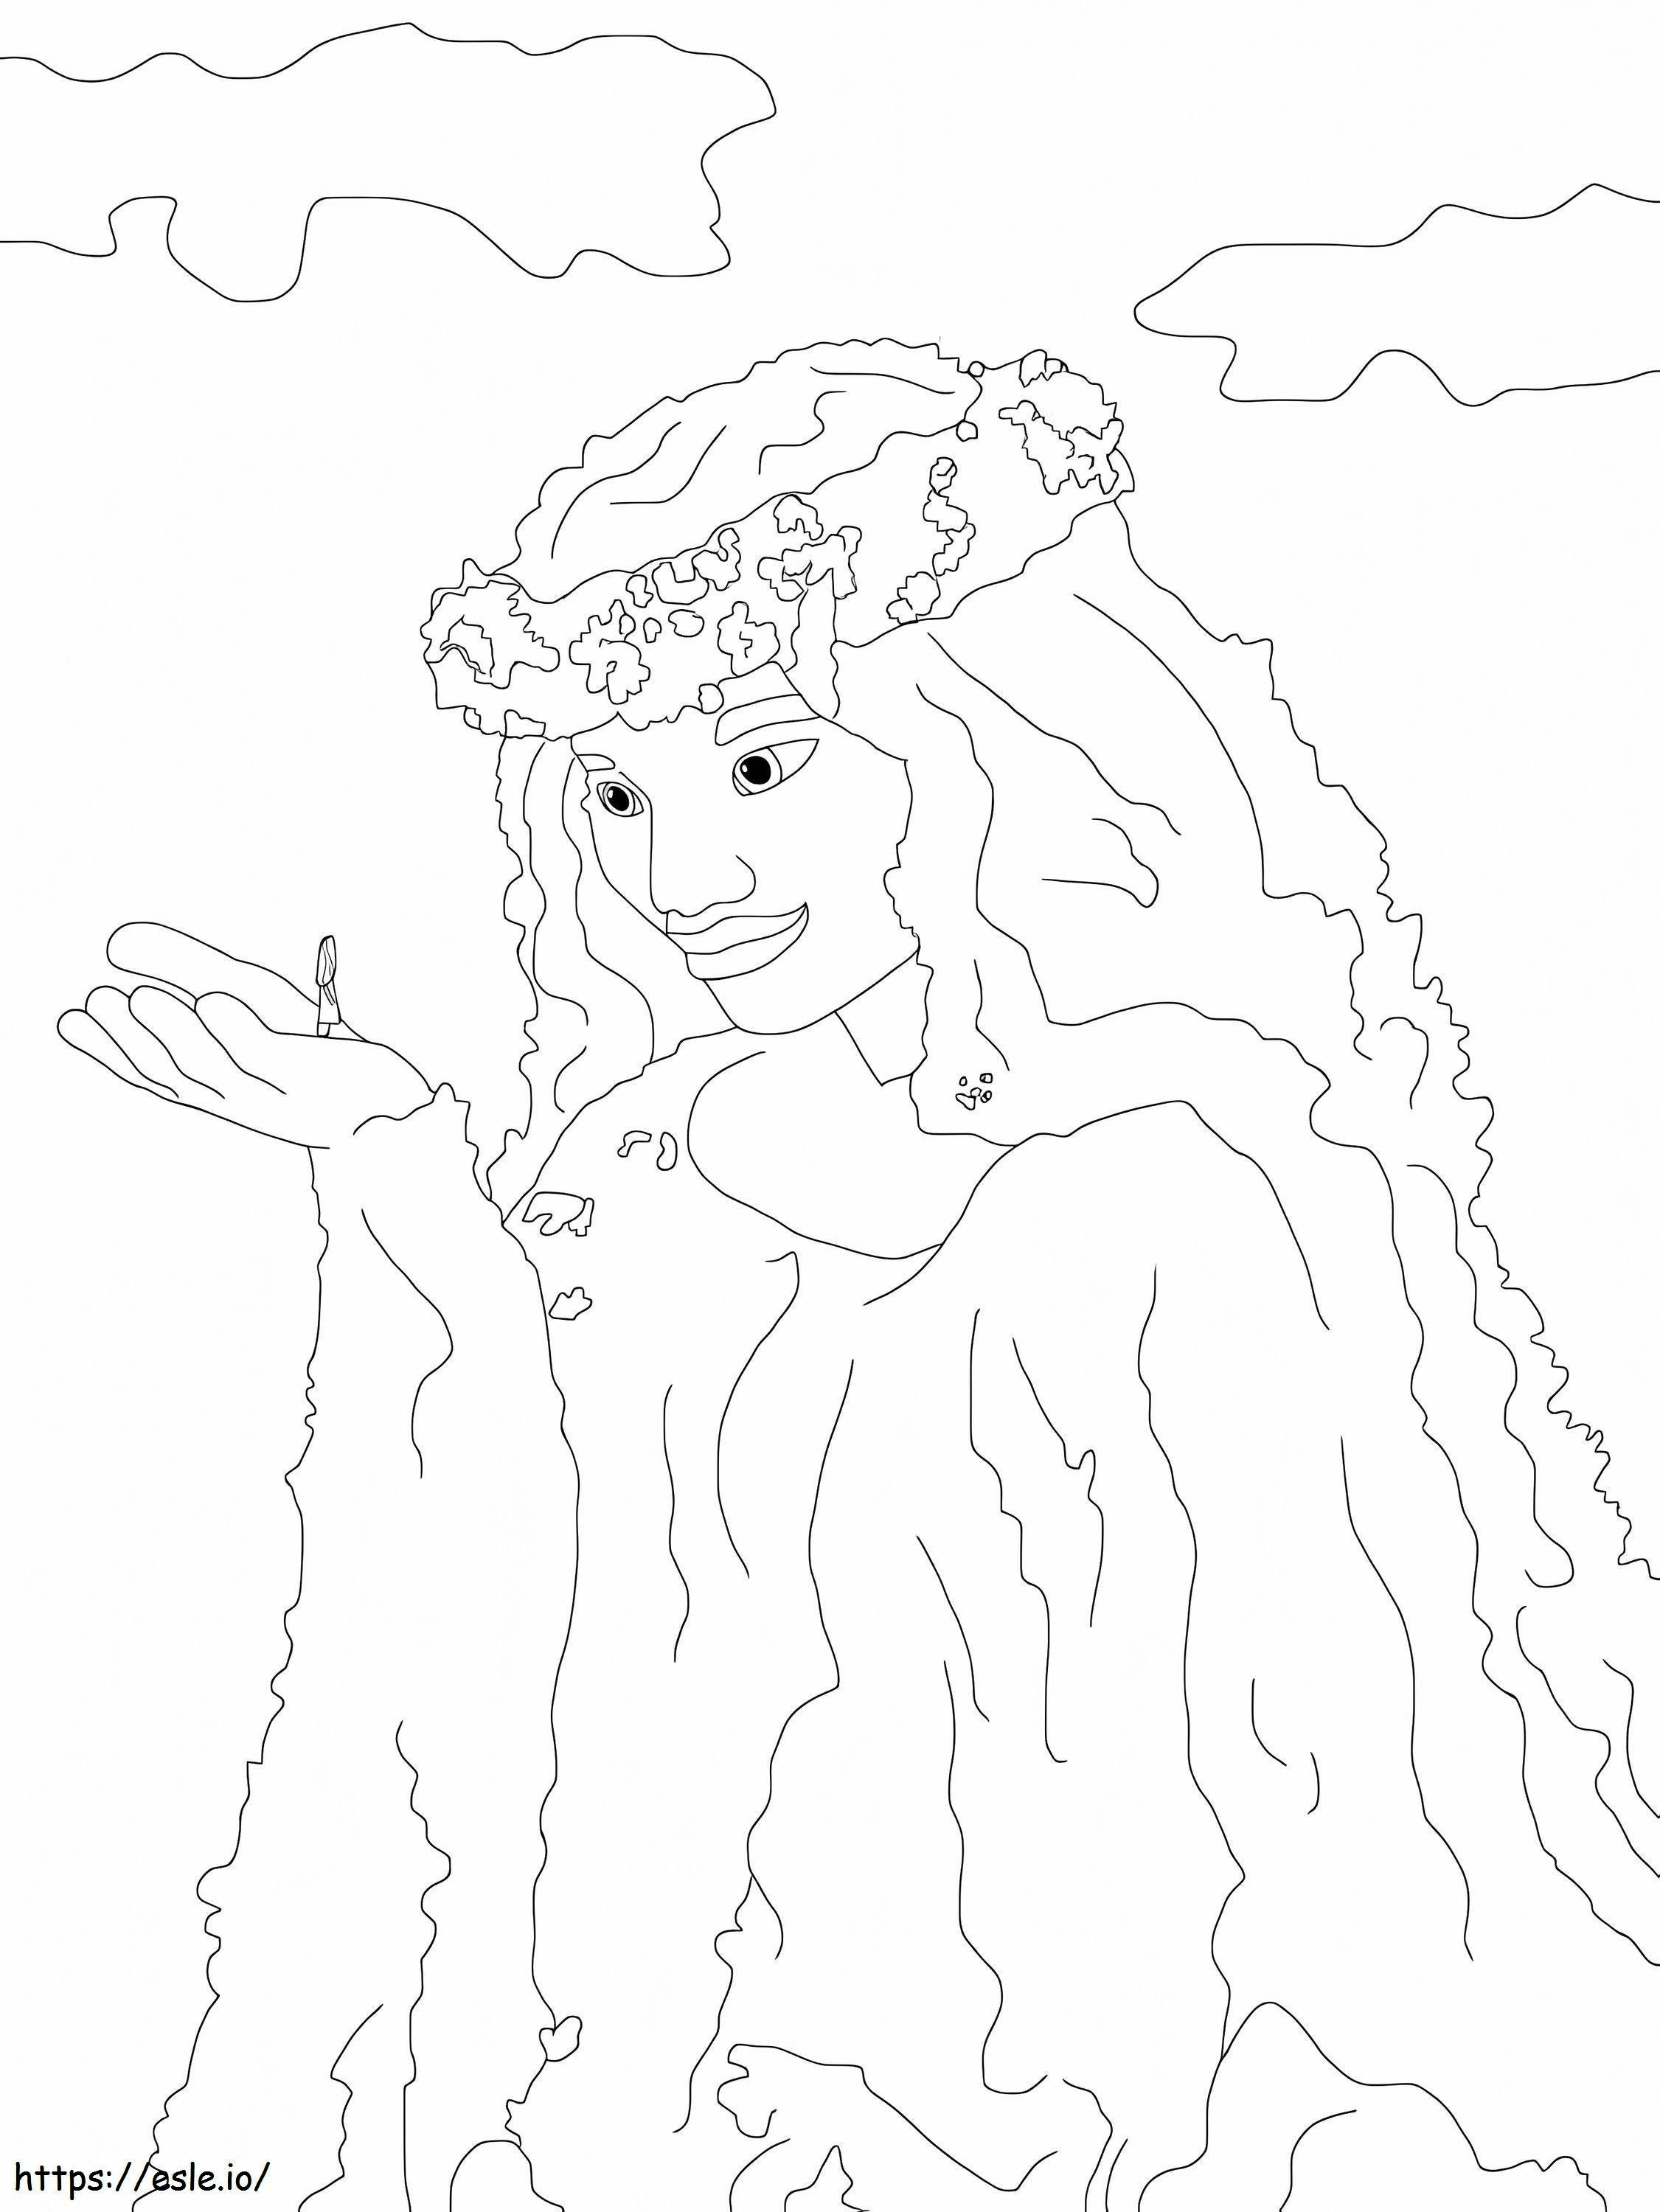 Ocean And Fiji coloring page